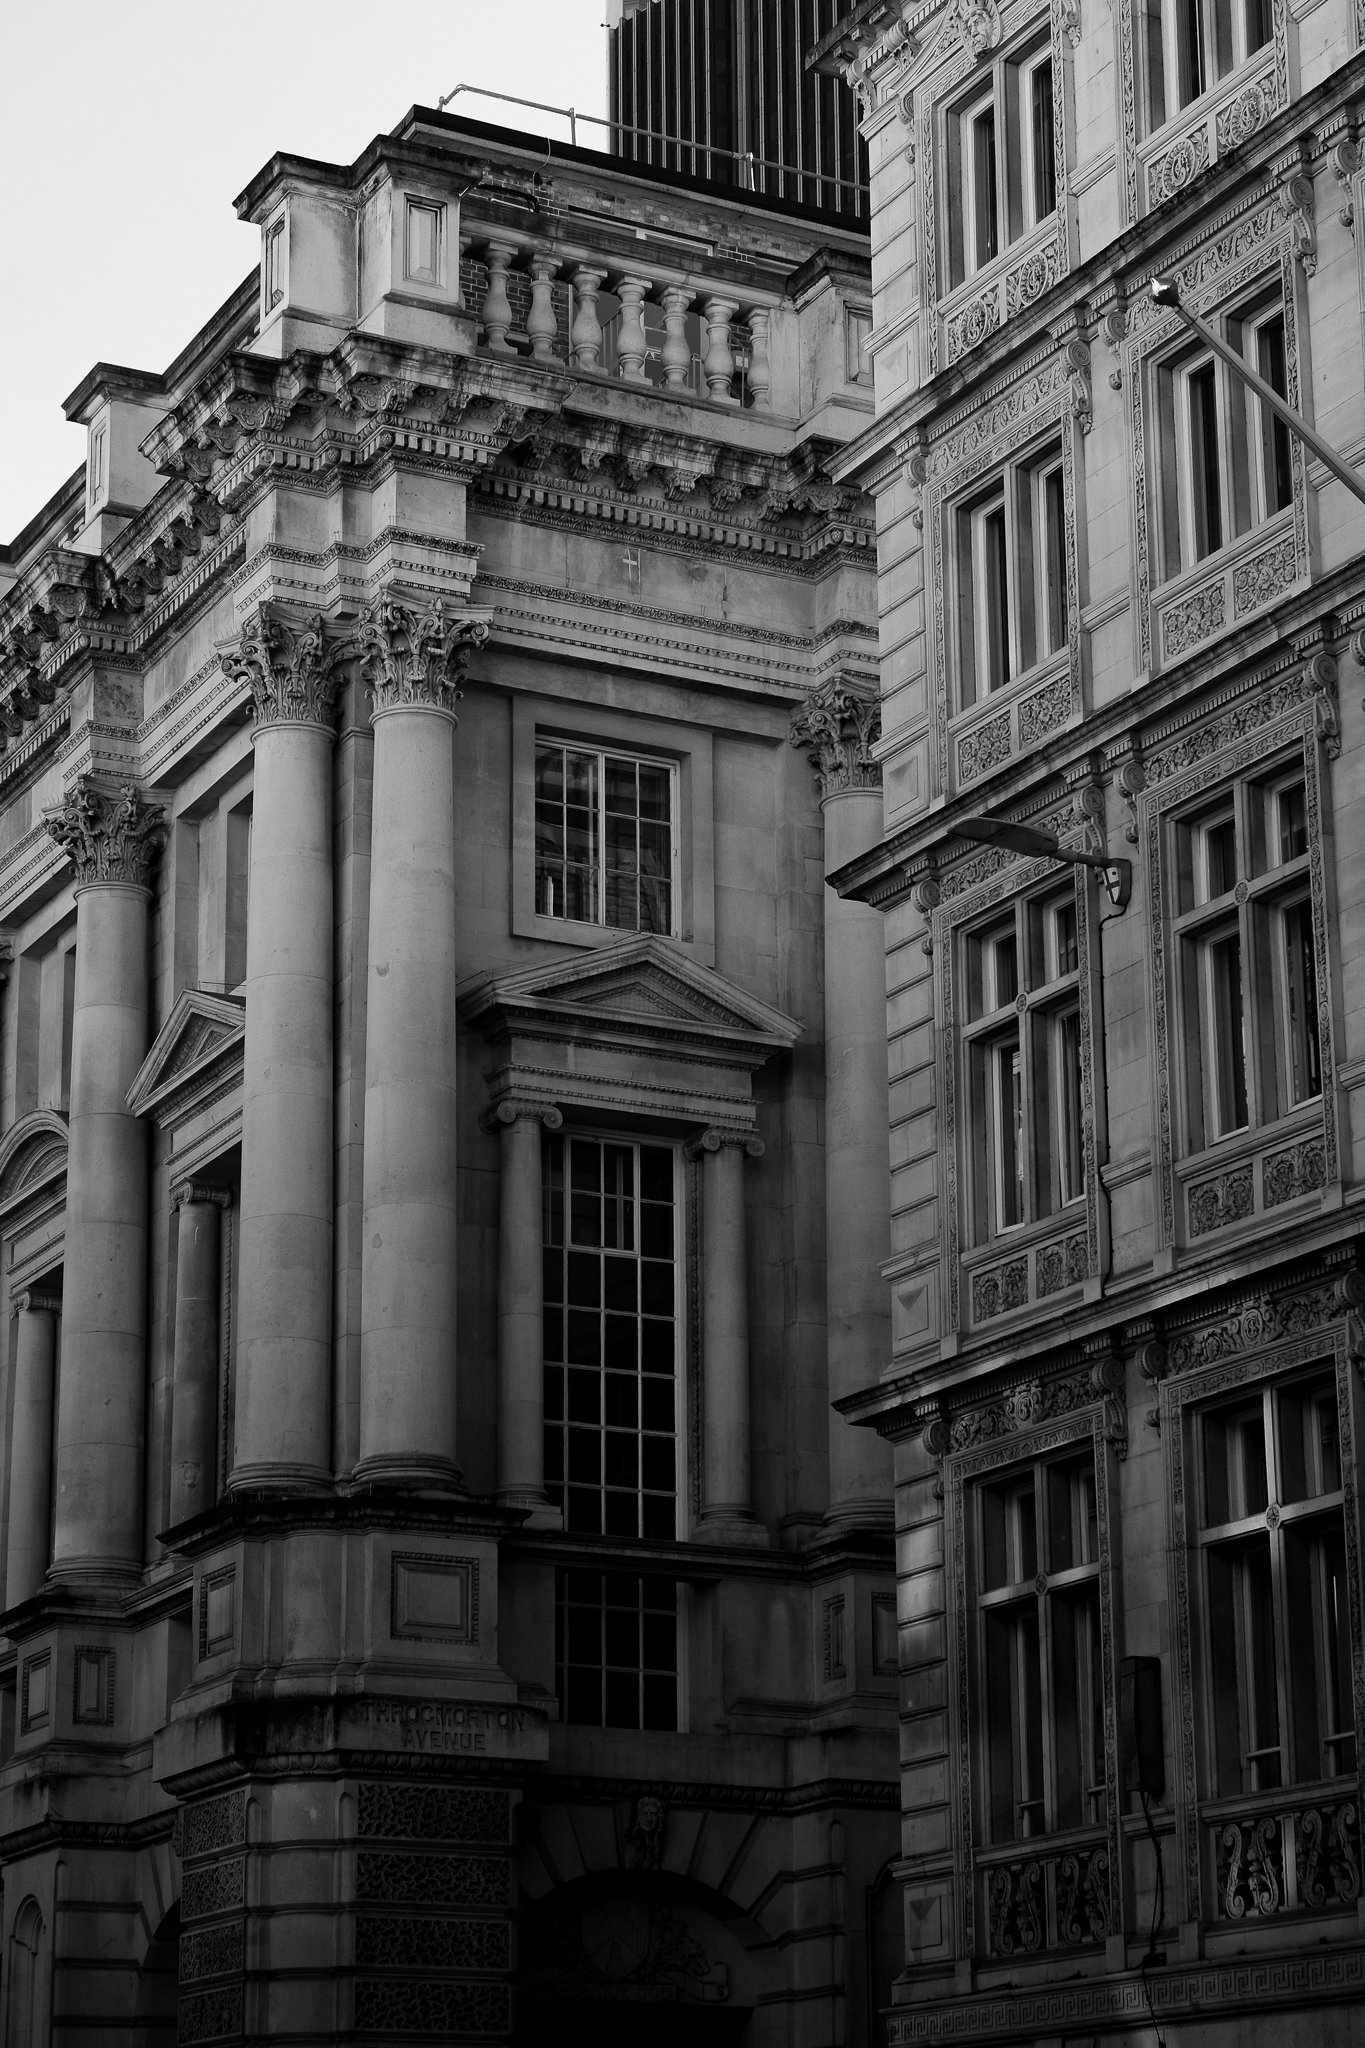 Black and white image of two ornate buildings on Throcmorton Avenue